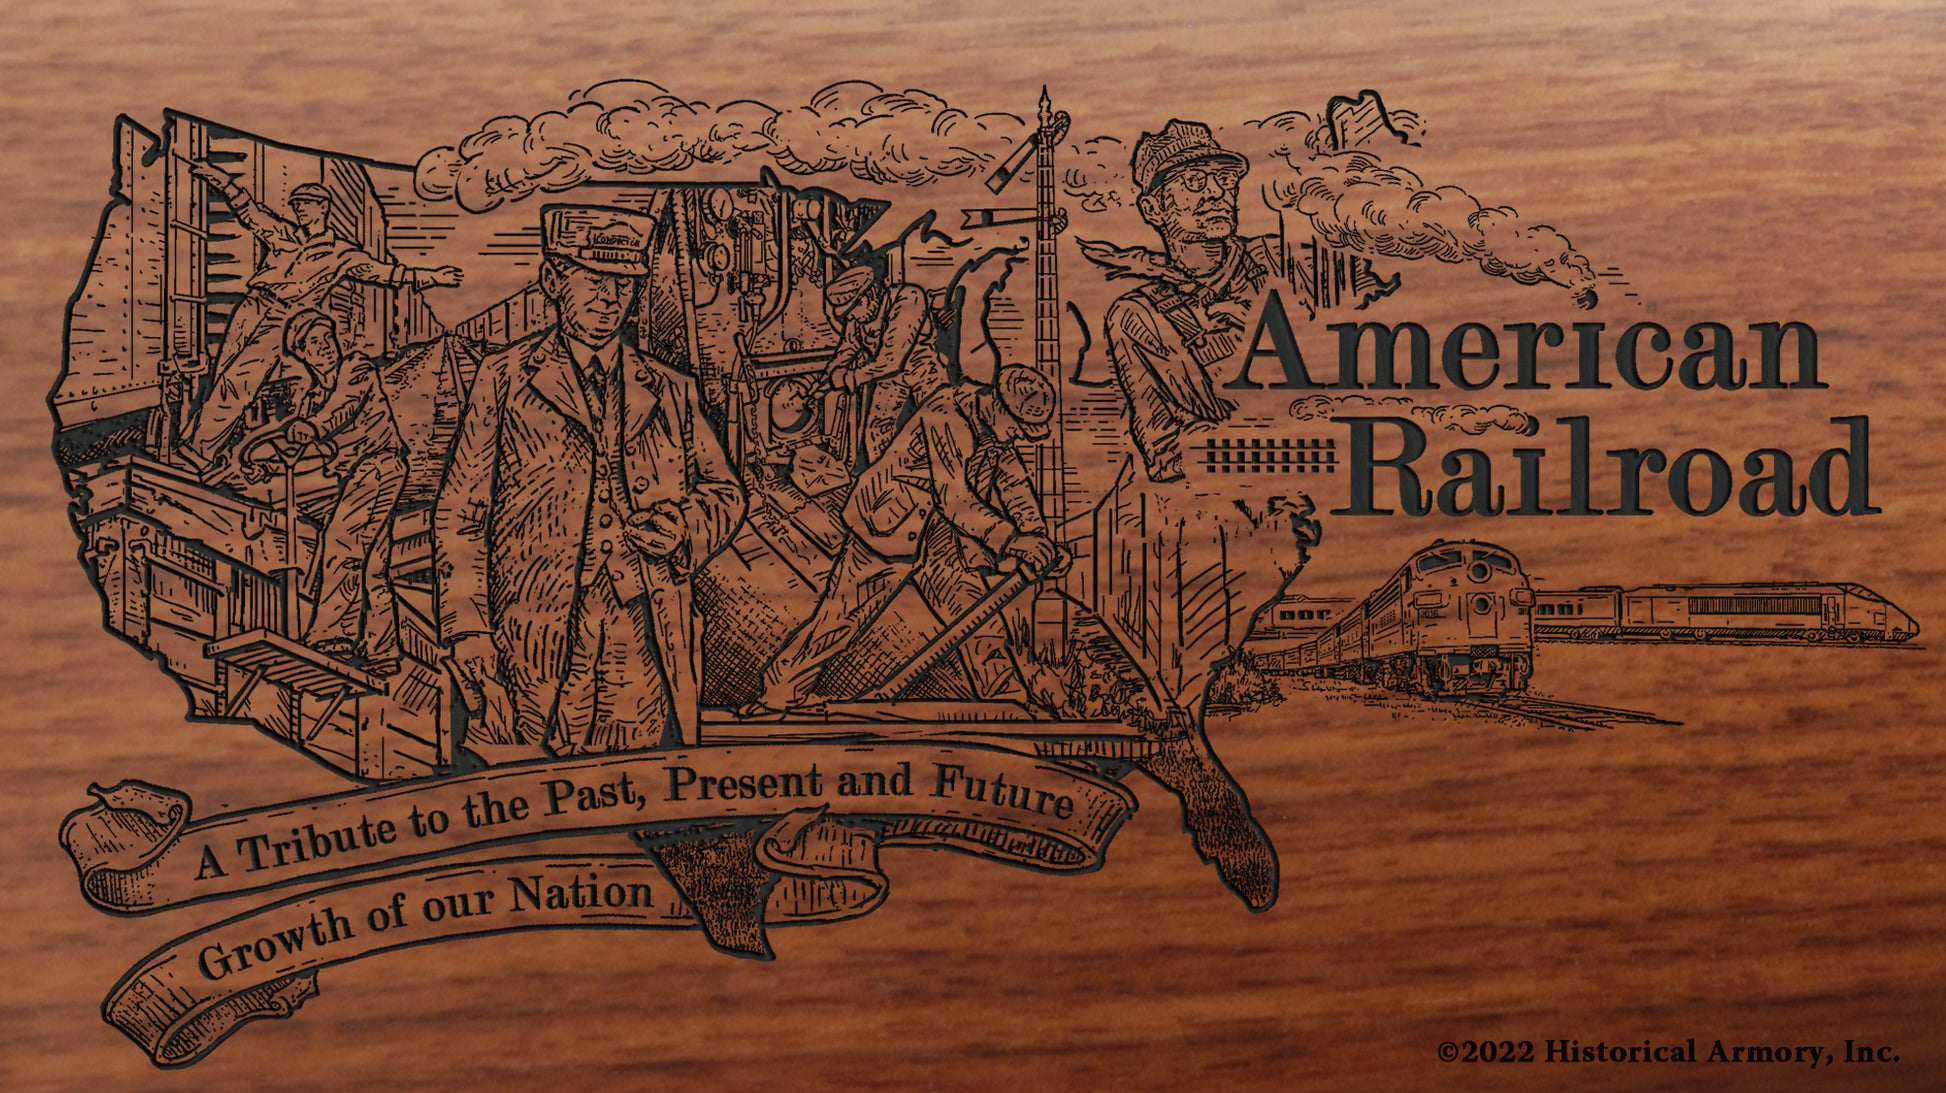 American Railroad Tribute to the Past, Present, and Future growth of our nation - detail of Henry Rifle engraving